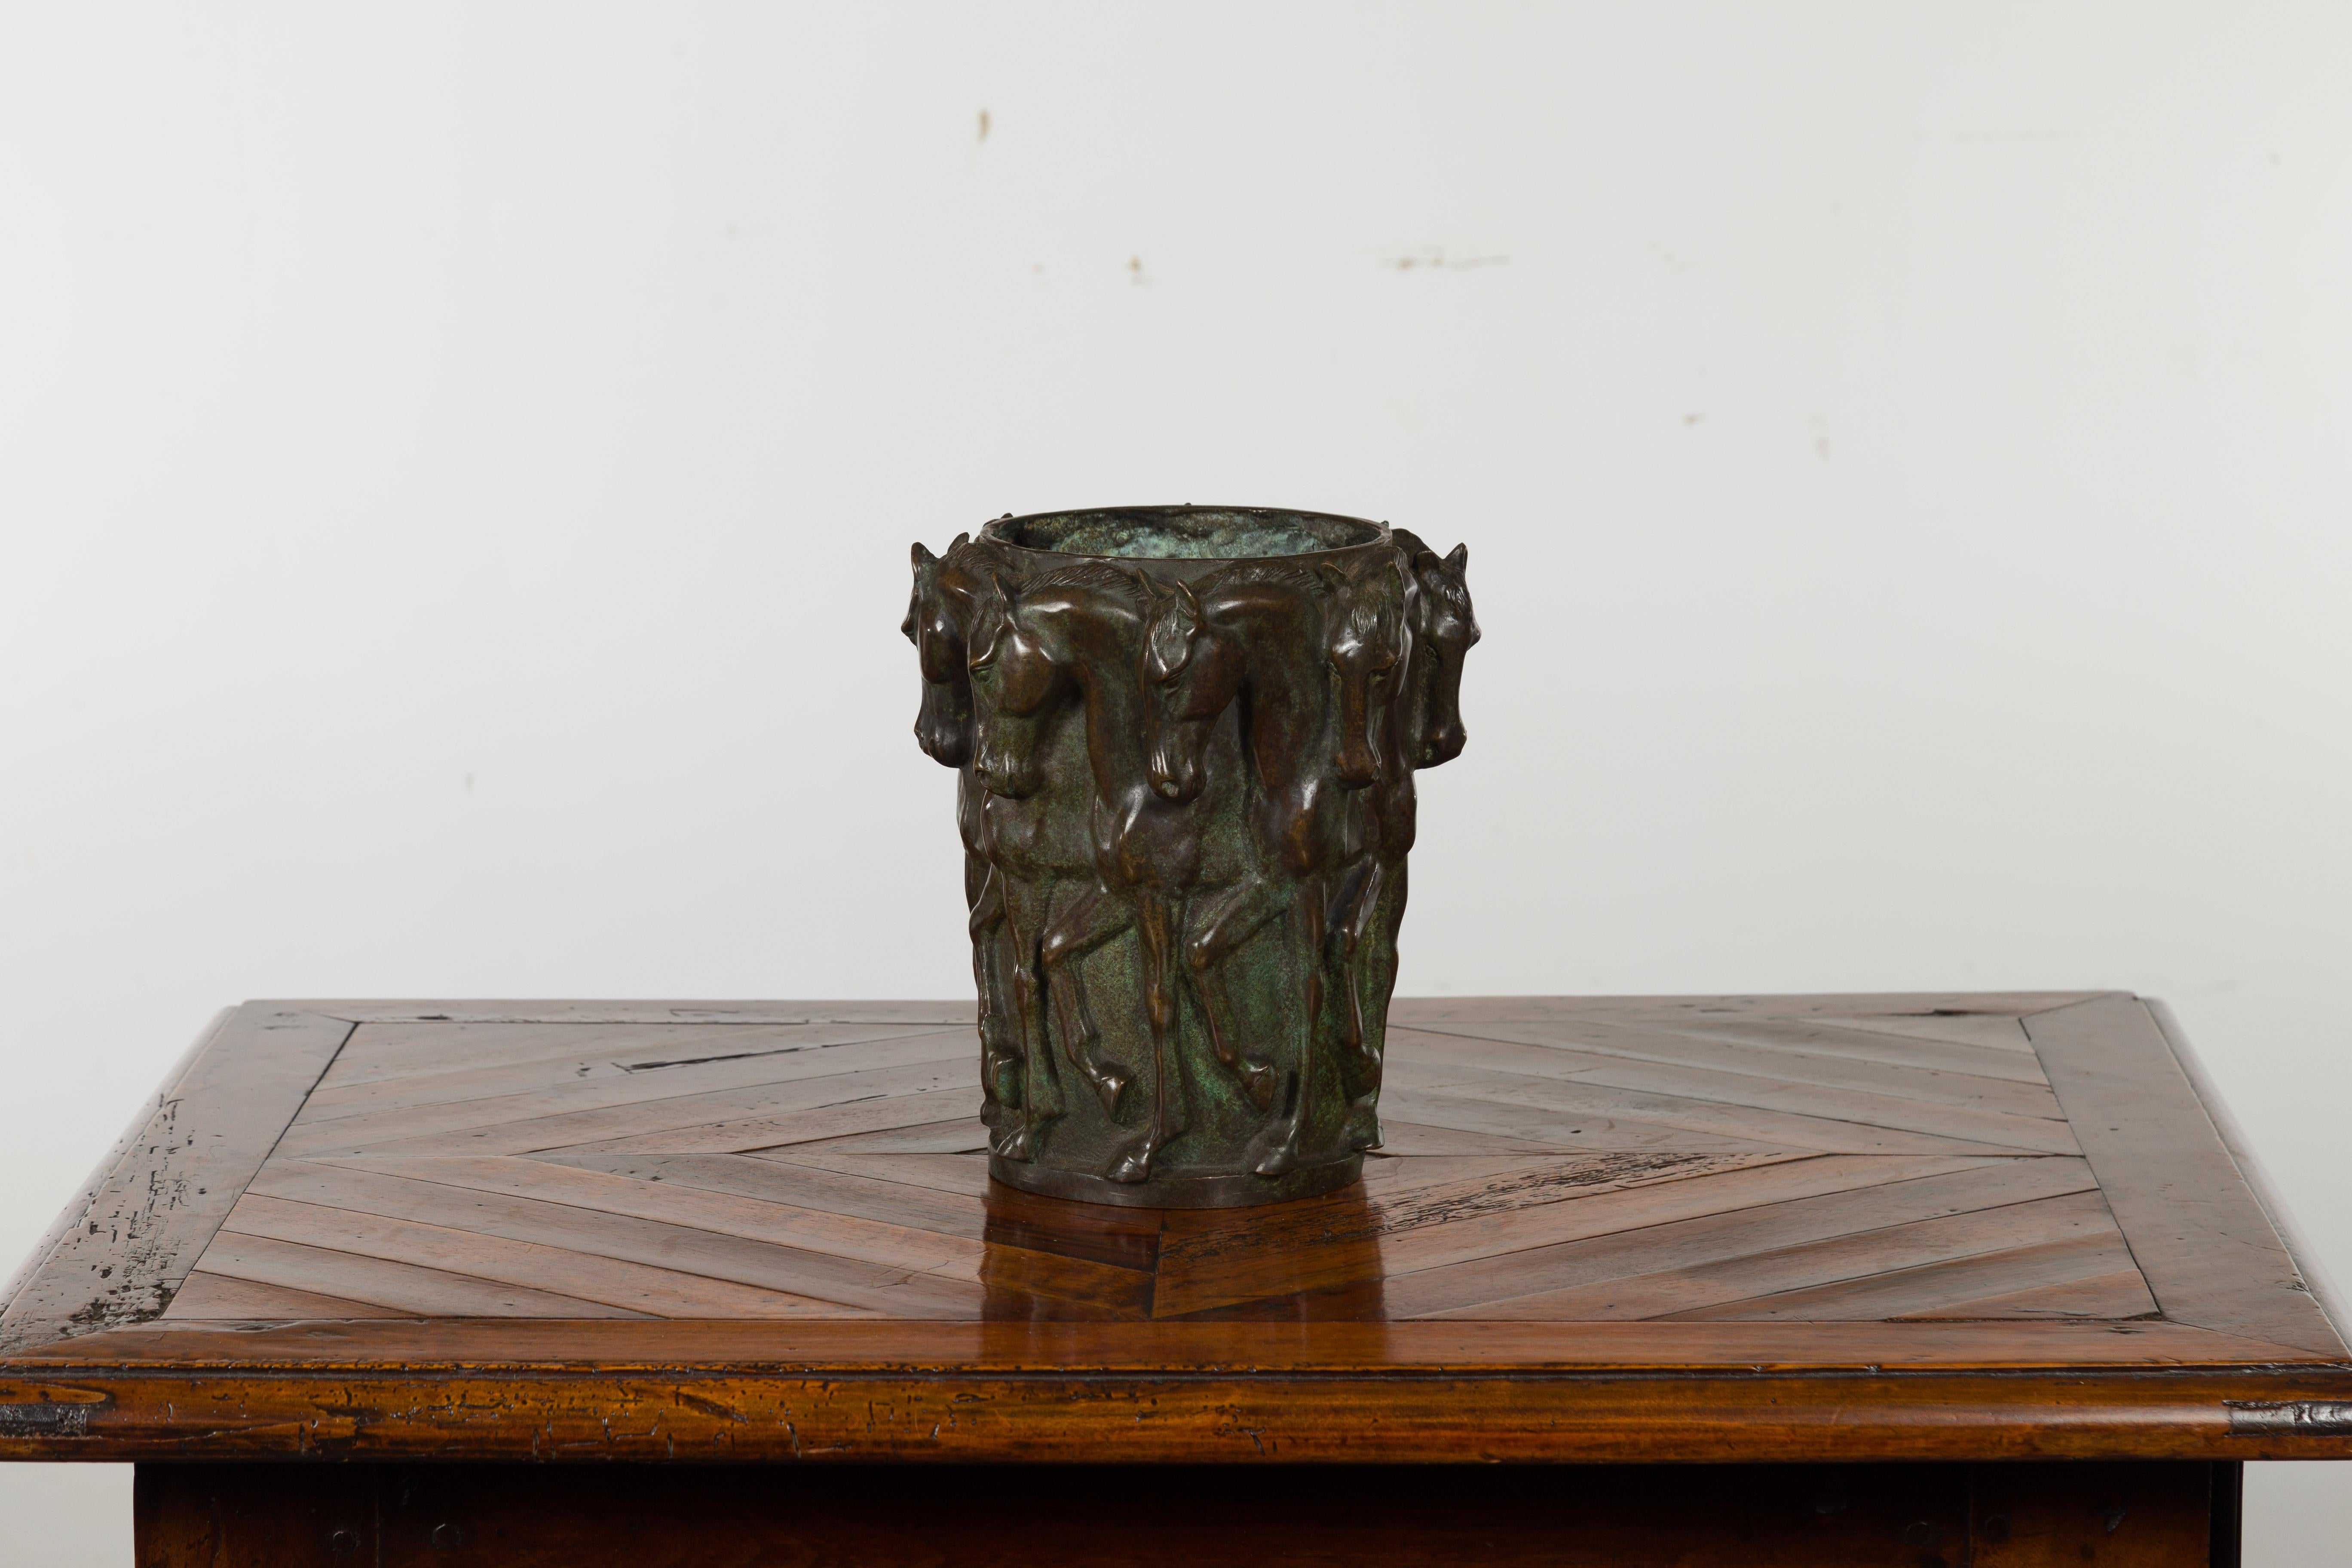 A bronze vase from the early 20th century, with frieze of passing horses. Created during the first quarter of the 20th century, this patinated bronze vase draws our attention with its frieze of passing horses cast in high relief. Placed anywhere in